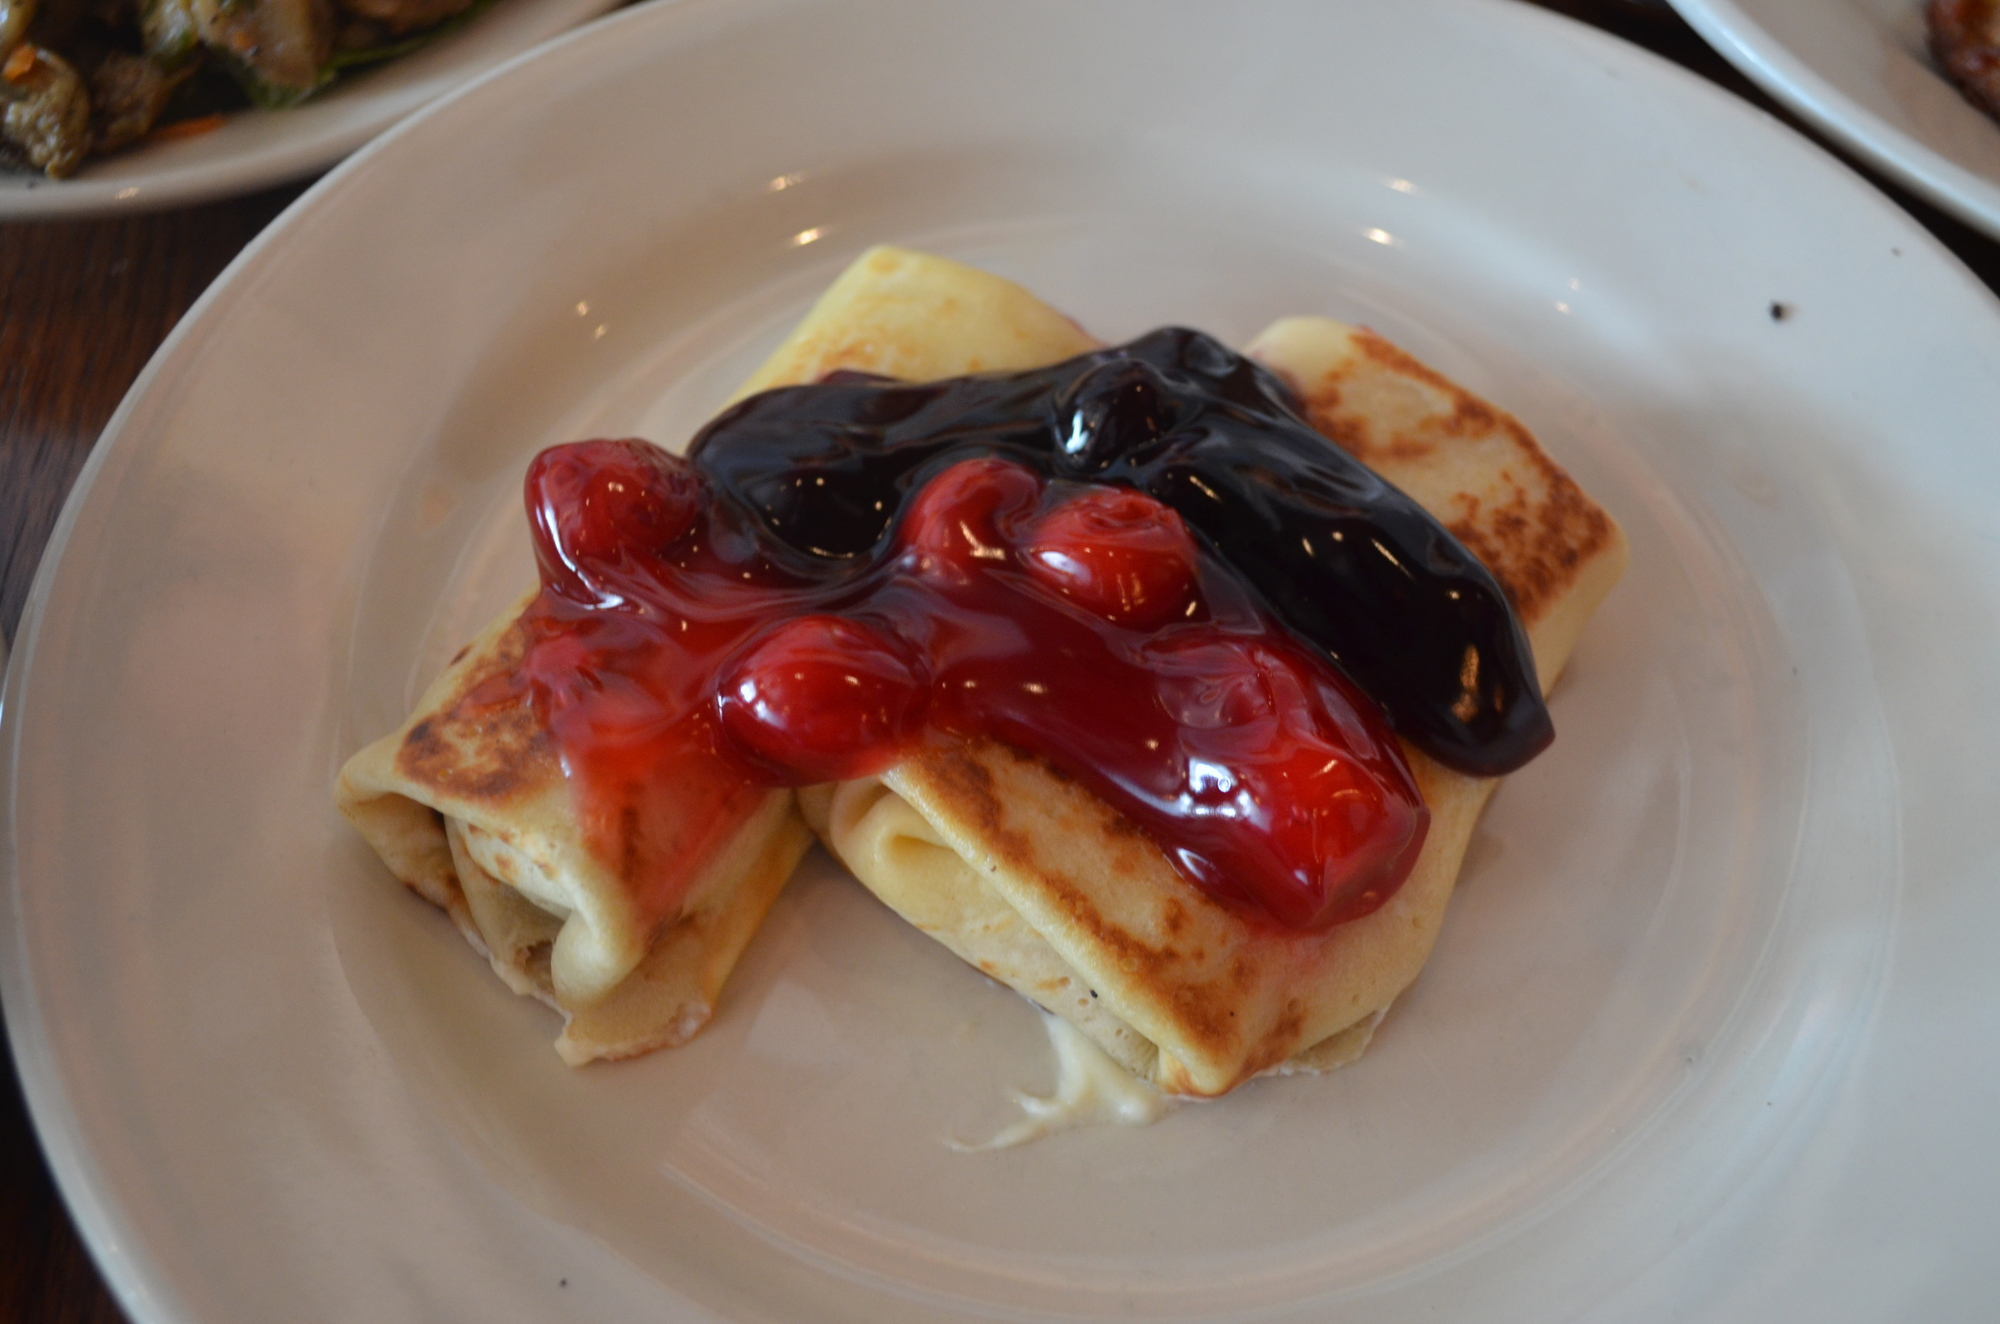 Homemade Cheese Blintzes: A breakfast staple, the deli takes slices of vanilla-infused crepes and then tops them with sweetened farmer cheese and berries and other preserves.